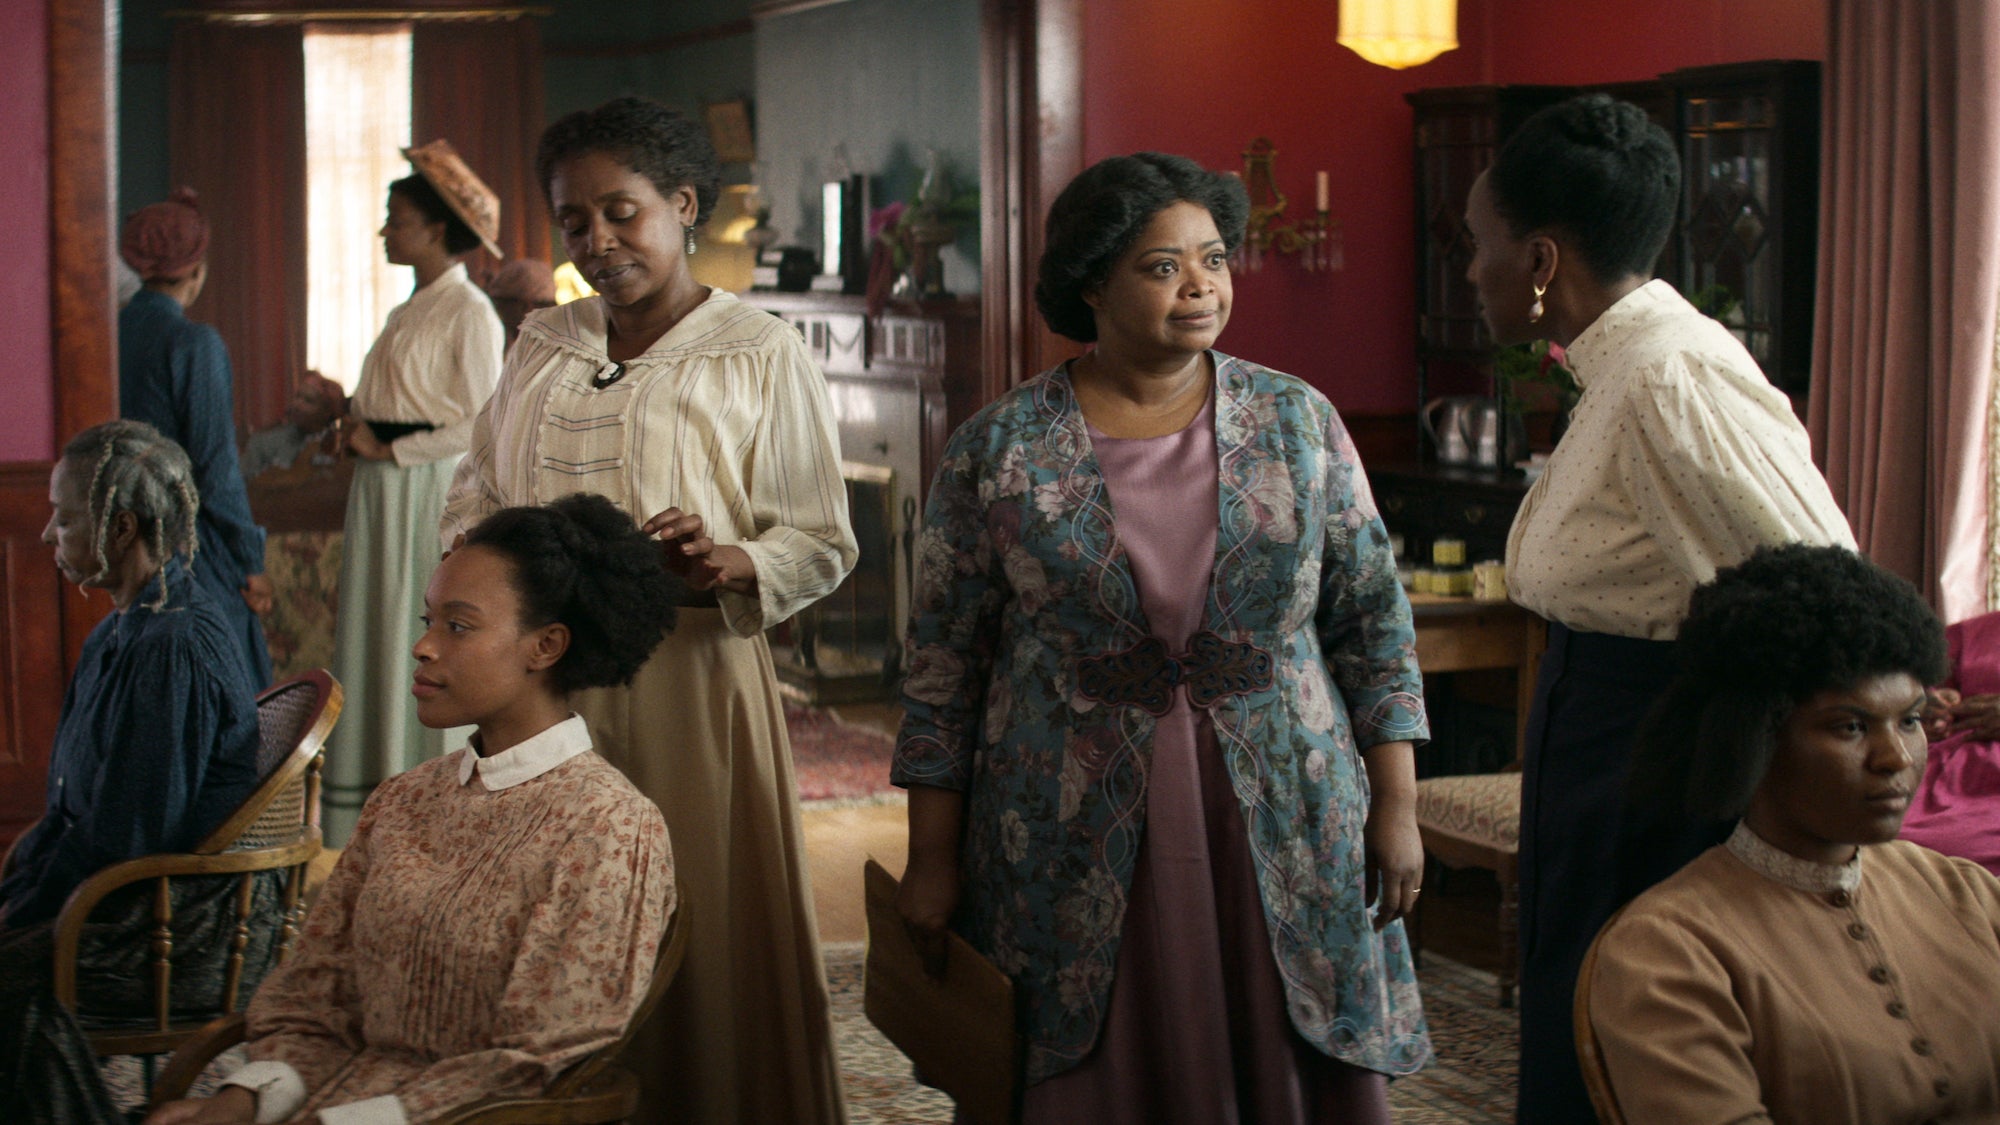 Coming To Netflix In March: Madam C.J. Walker Series & 7 Other Titles We Can't Wait to Binge